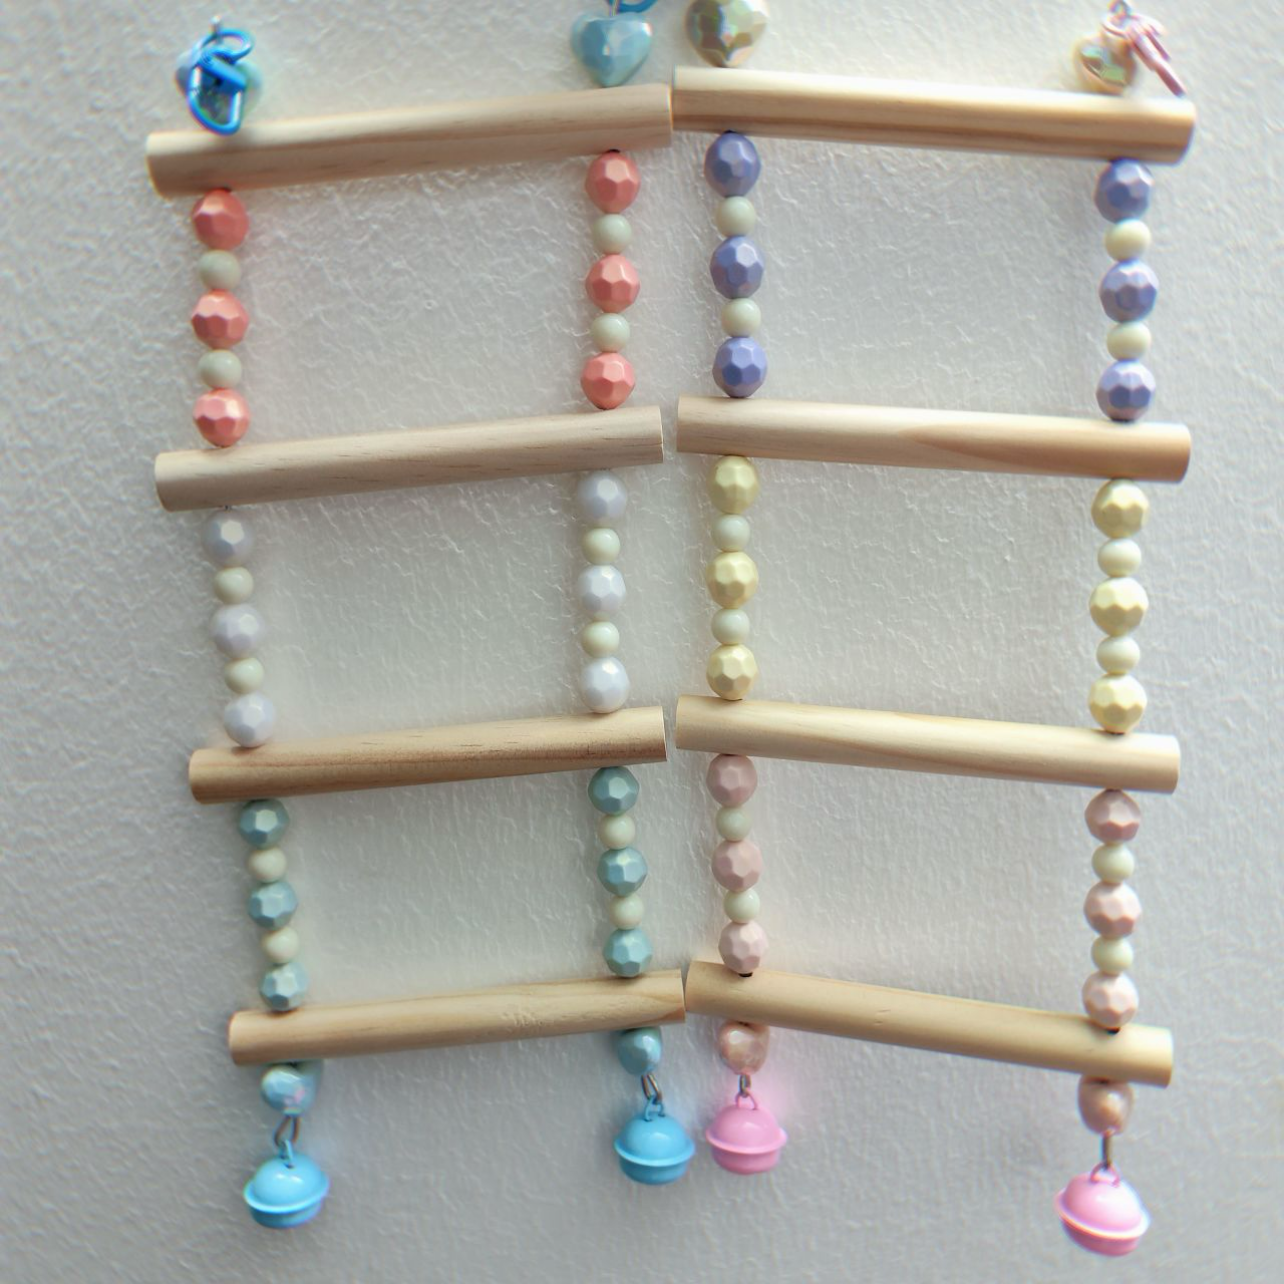 Handmade Colorful Parrot Indoor Pet Birds Swing Ladder - Birdcage Toy with Hook with Beaded Ladder Design 4 Sturdy Perches - Parakeet/Budgie, Cockatiel, Finch, Lovebird, Monk Parakeet, Dove, Parrotlet, Sparrow